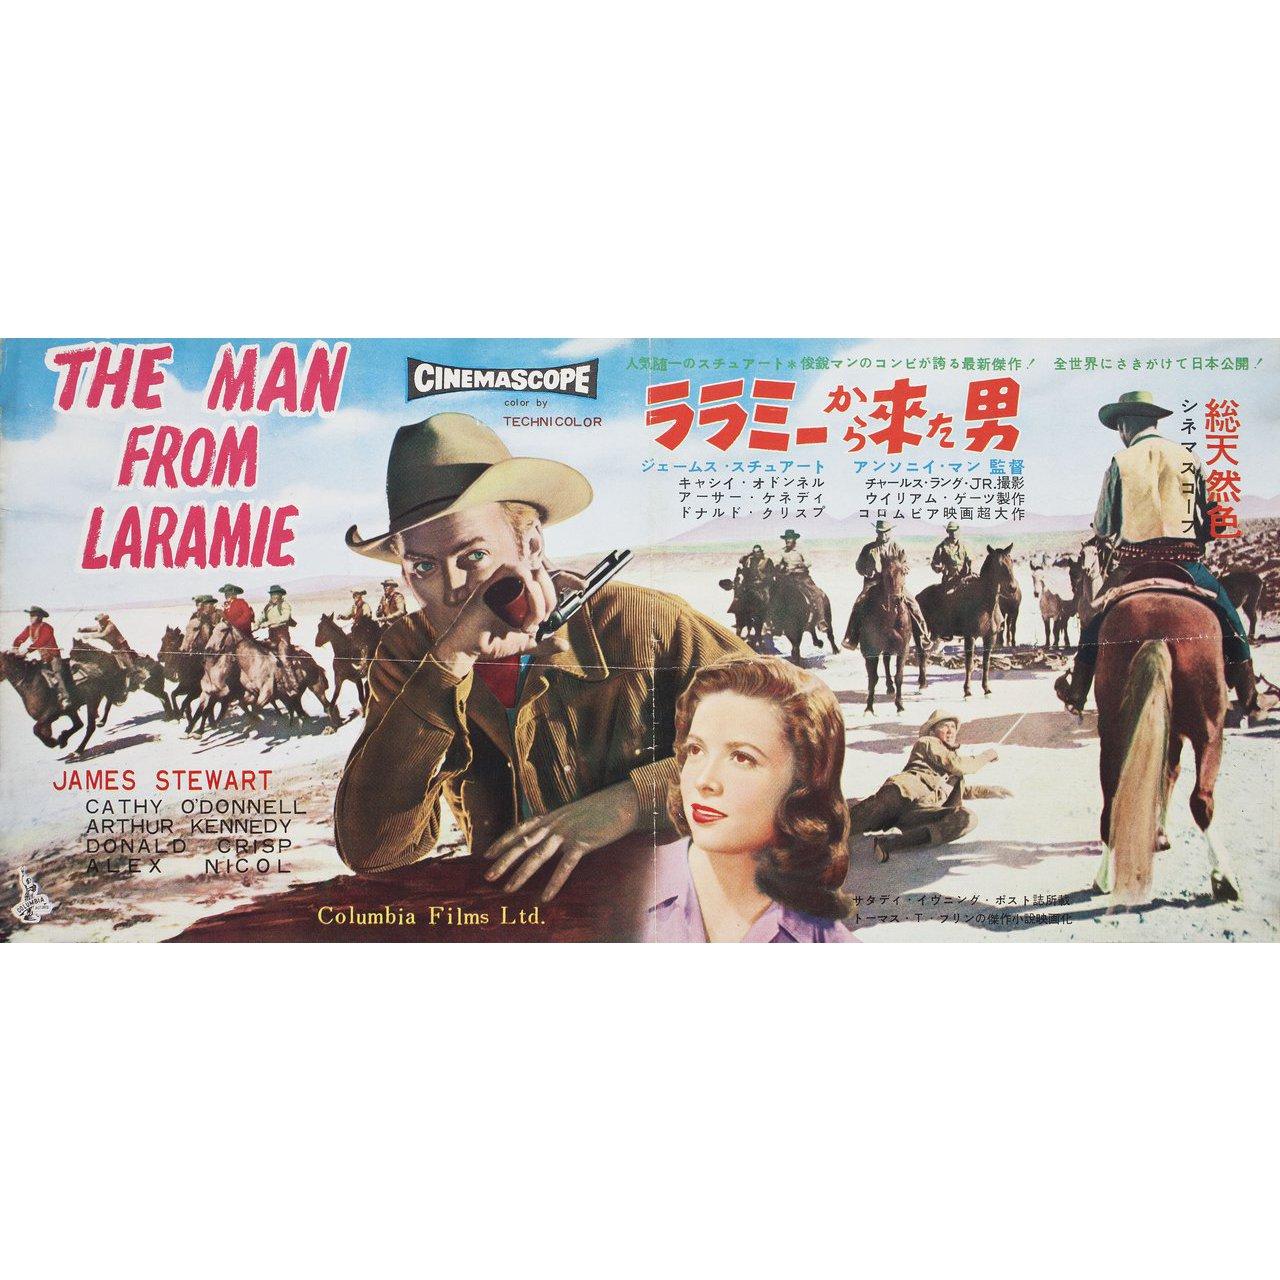 Original 1955 Japanese press poster for the film The Man from Laramie directed by Anthony Mann with James Stewart / Arthur Kennedy / Donald Crisp / Cathy O'Donnell. Very Good-Fine condition, folded. Many original posters were issued folded or were